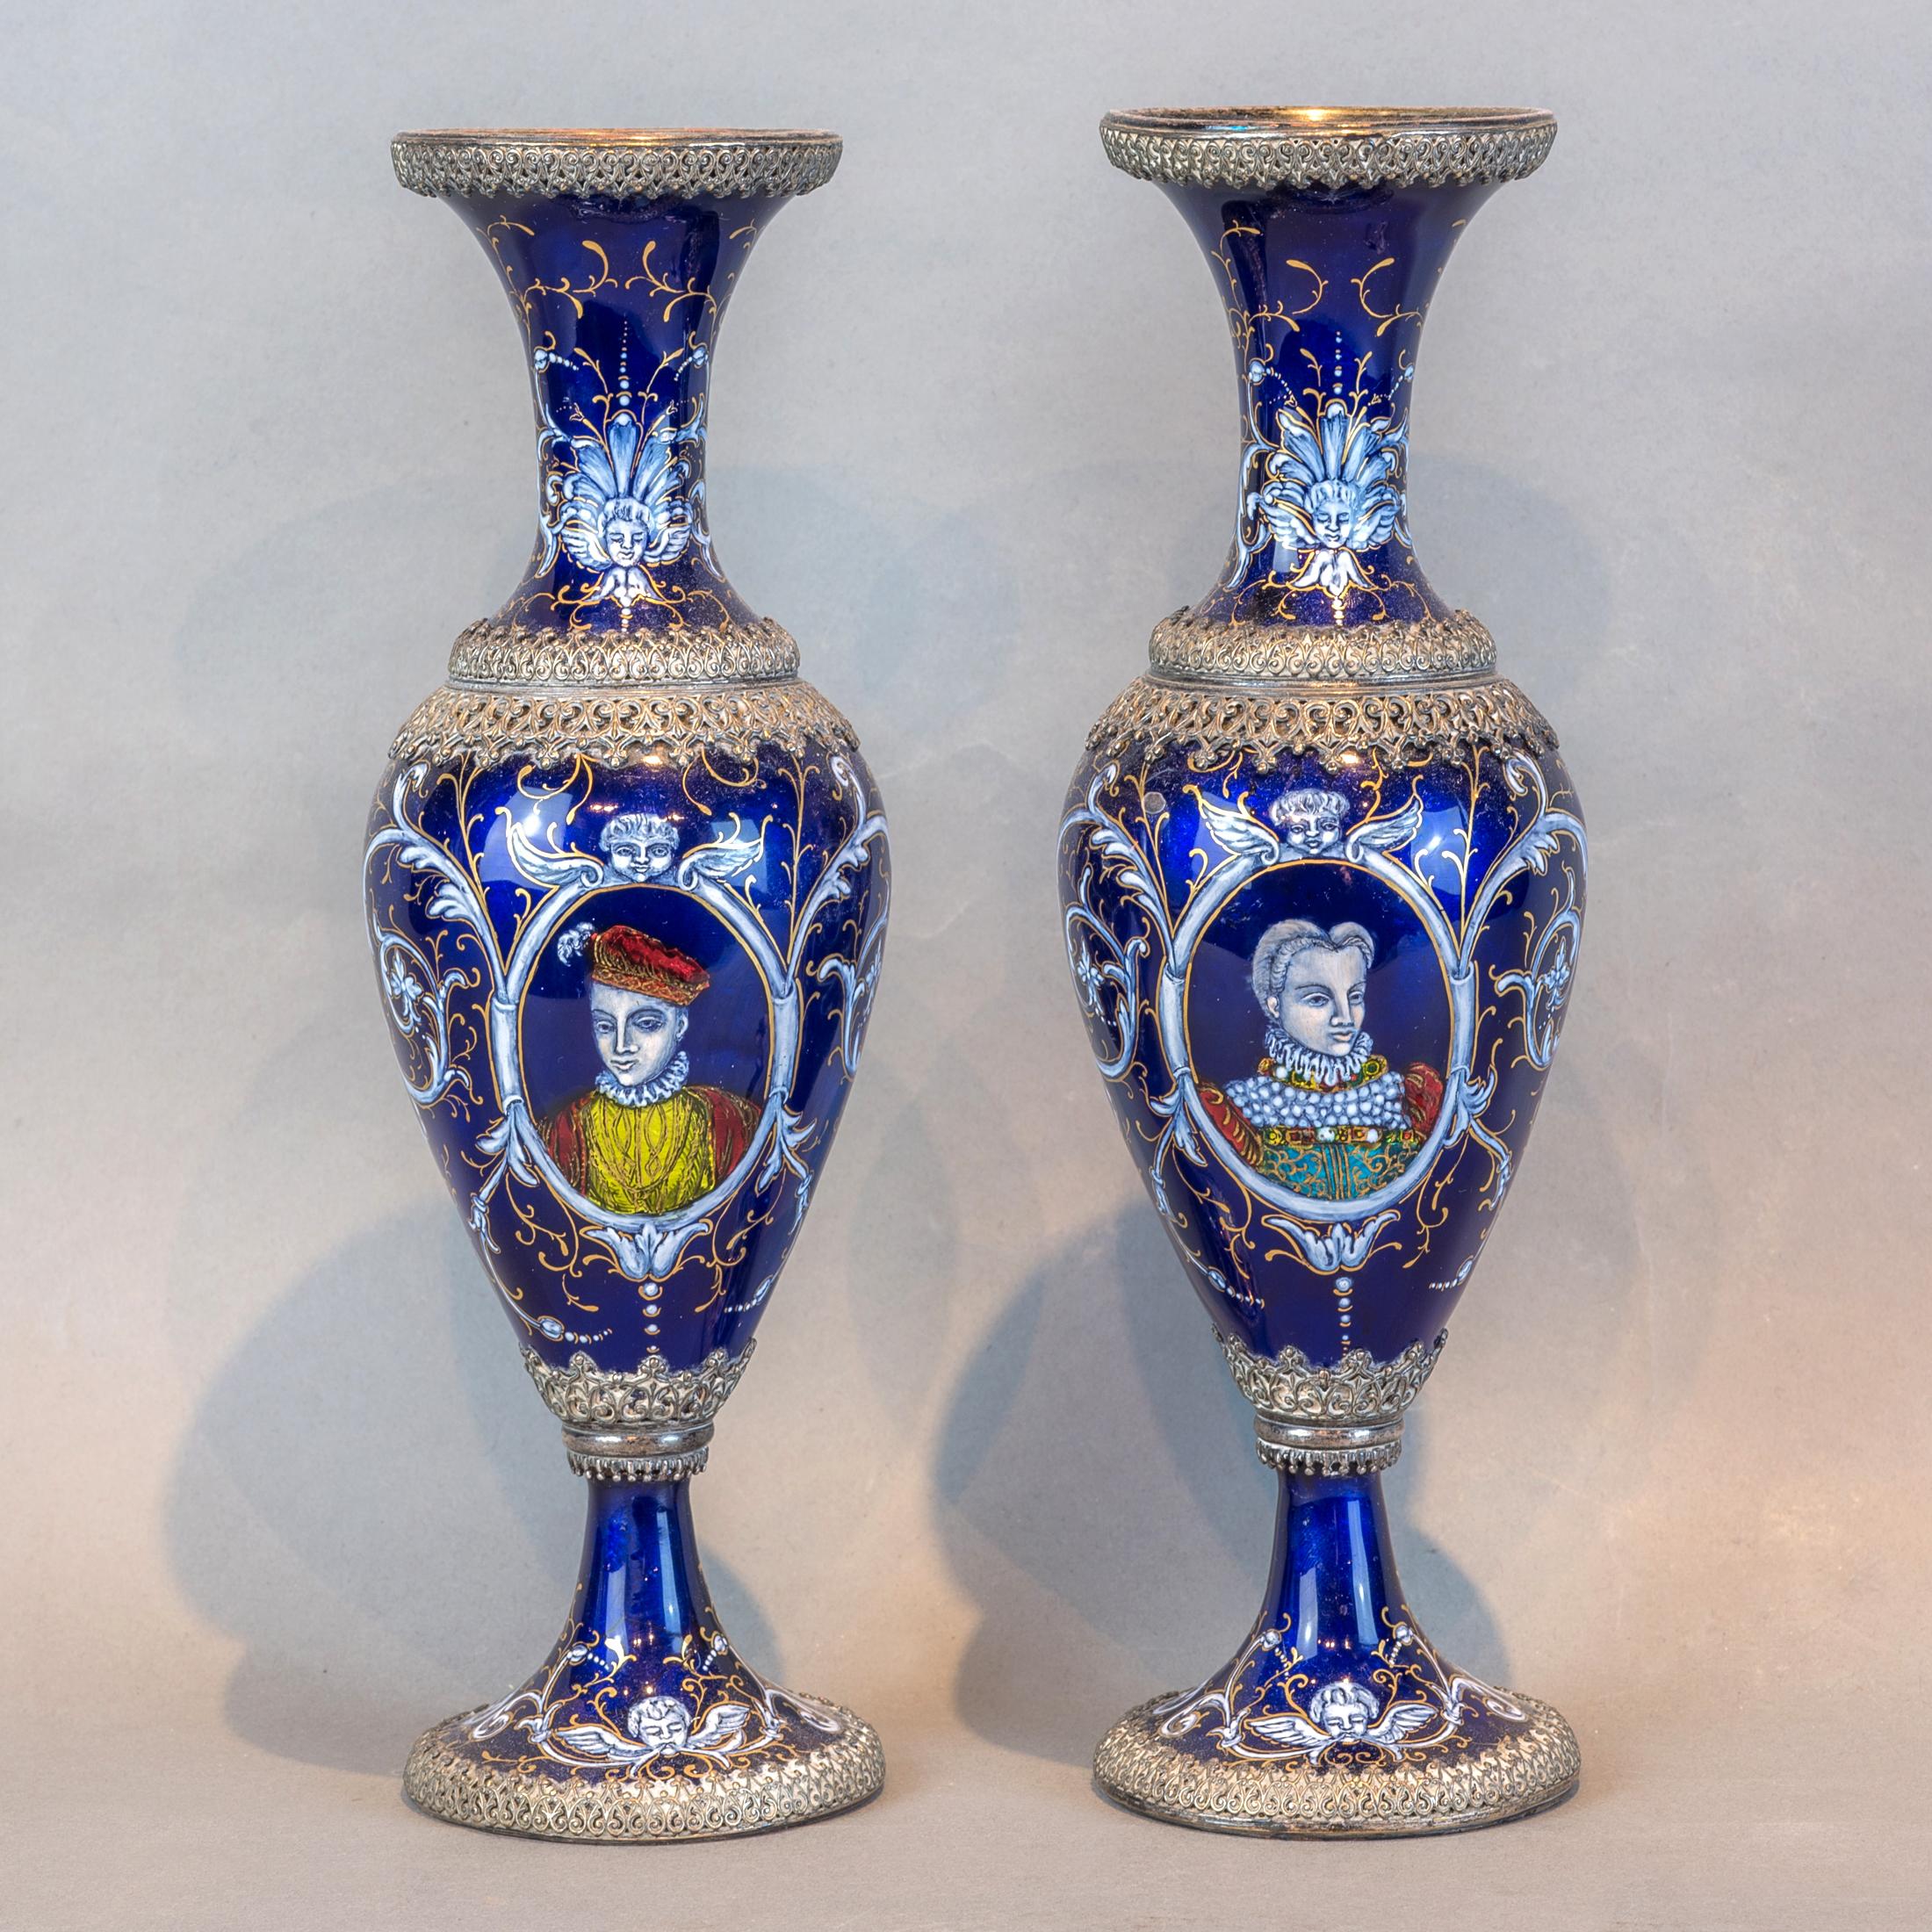 Each with baluster form decorated with a classical profile. Silvered enamel, Austria.

Origin: Austrian
Date: 19th century
Size: 9 3/4 in. x 3 1/4 in.